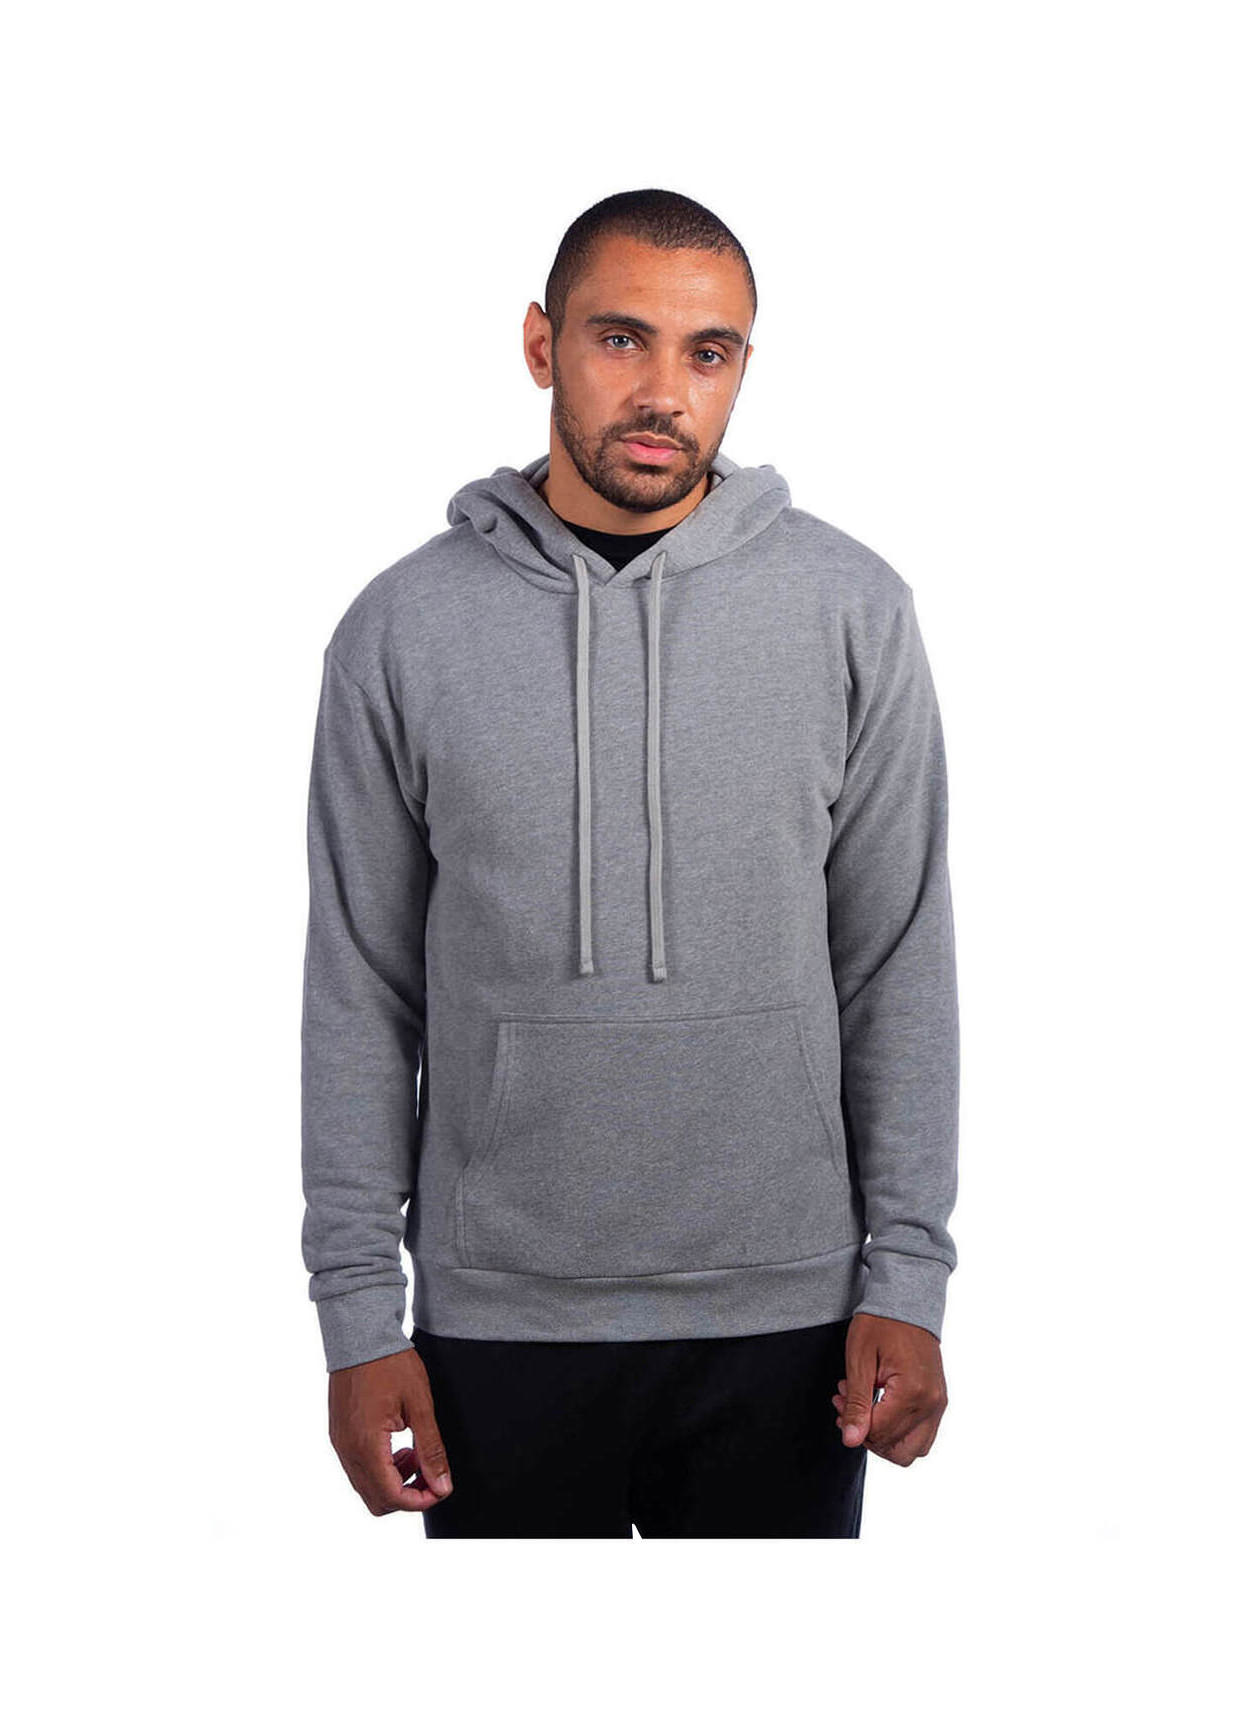 Logo Hoodie  Business Next Level Men's Heather Gray Unisex Sueded French  Terry Pullover Hoodie